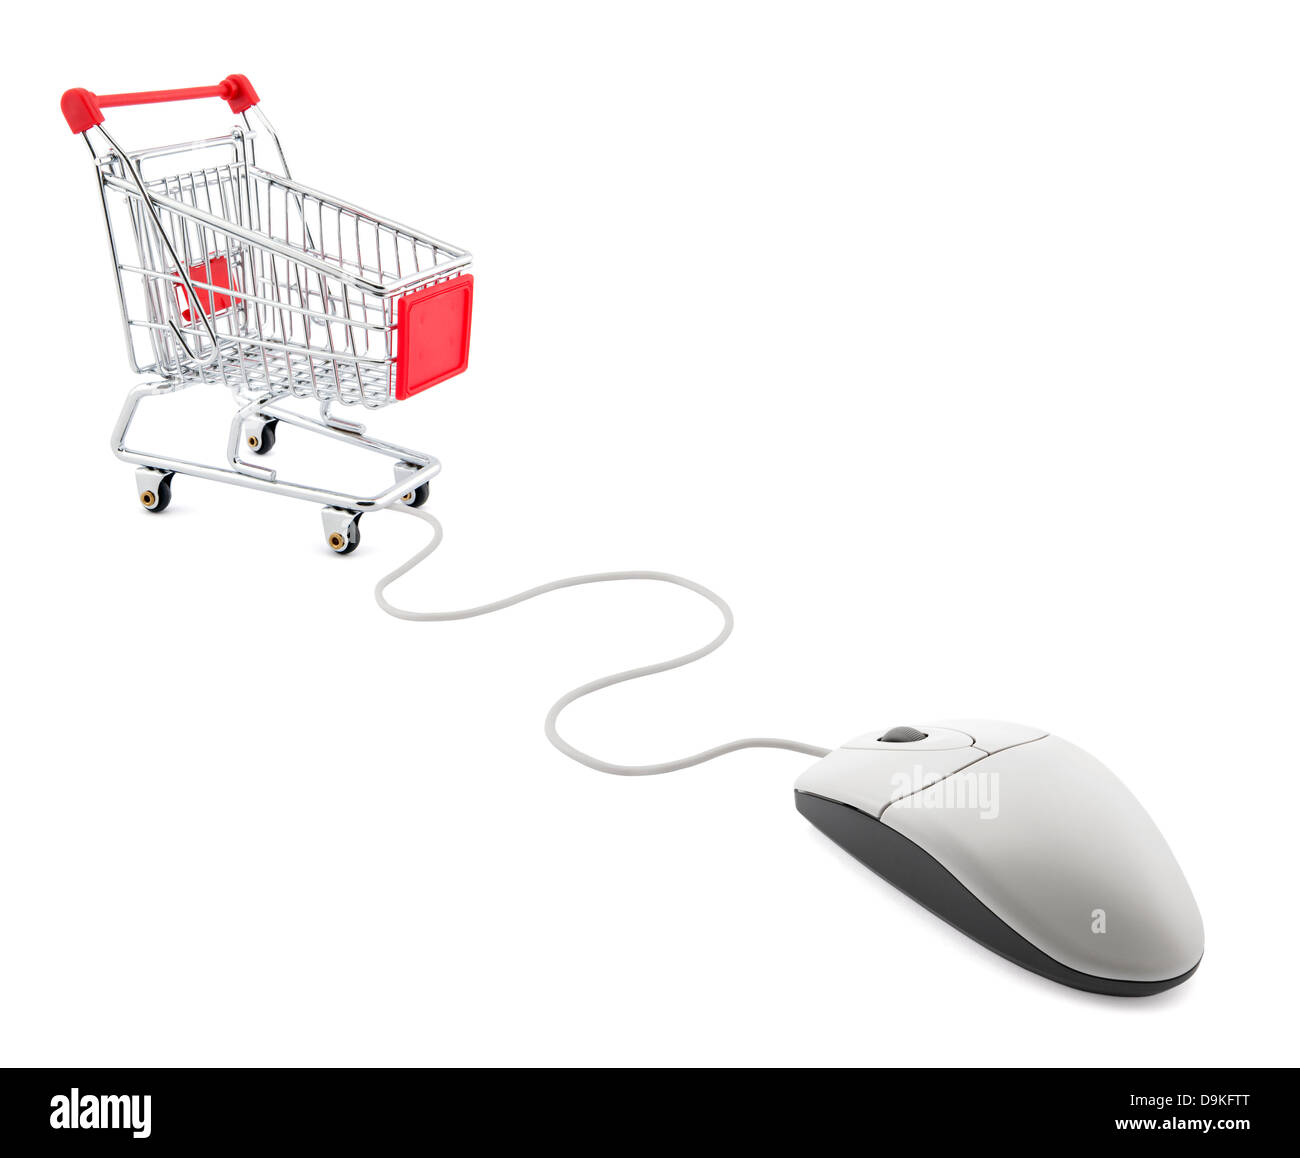 Internet shopping. Computer mouse and shopping cart. Stock Photo